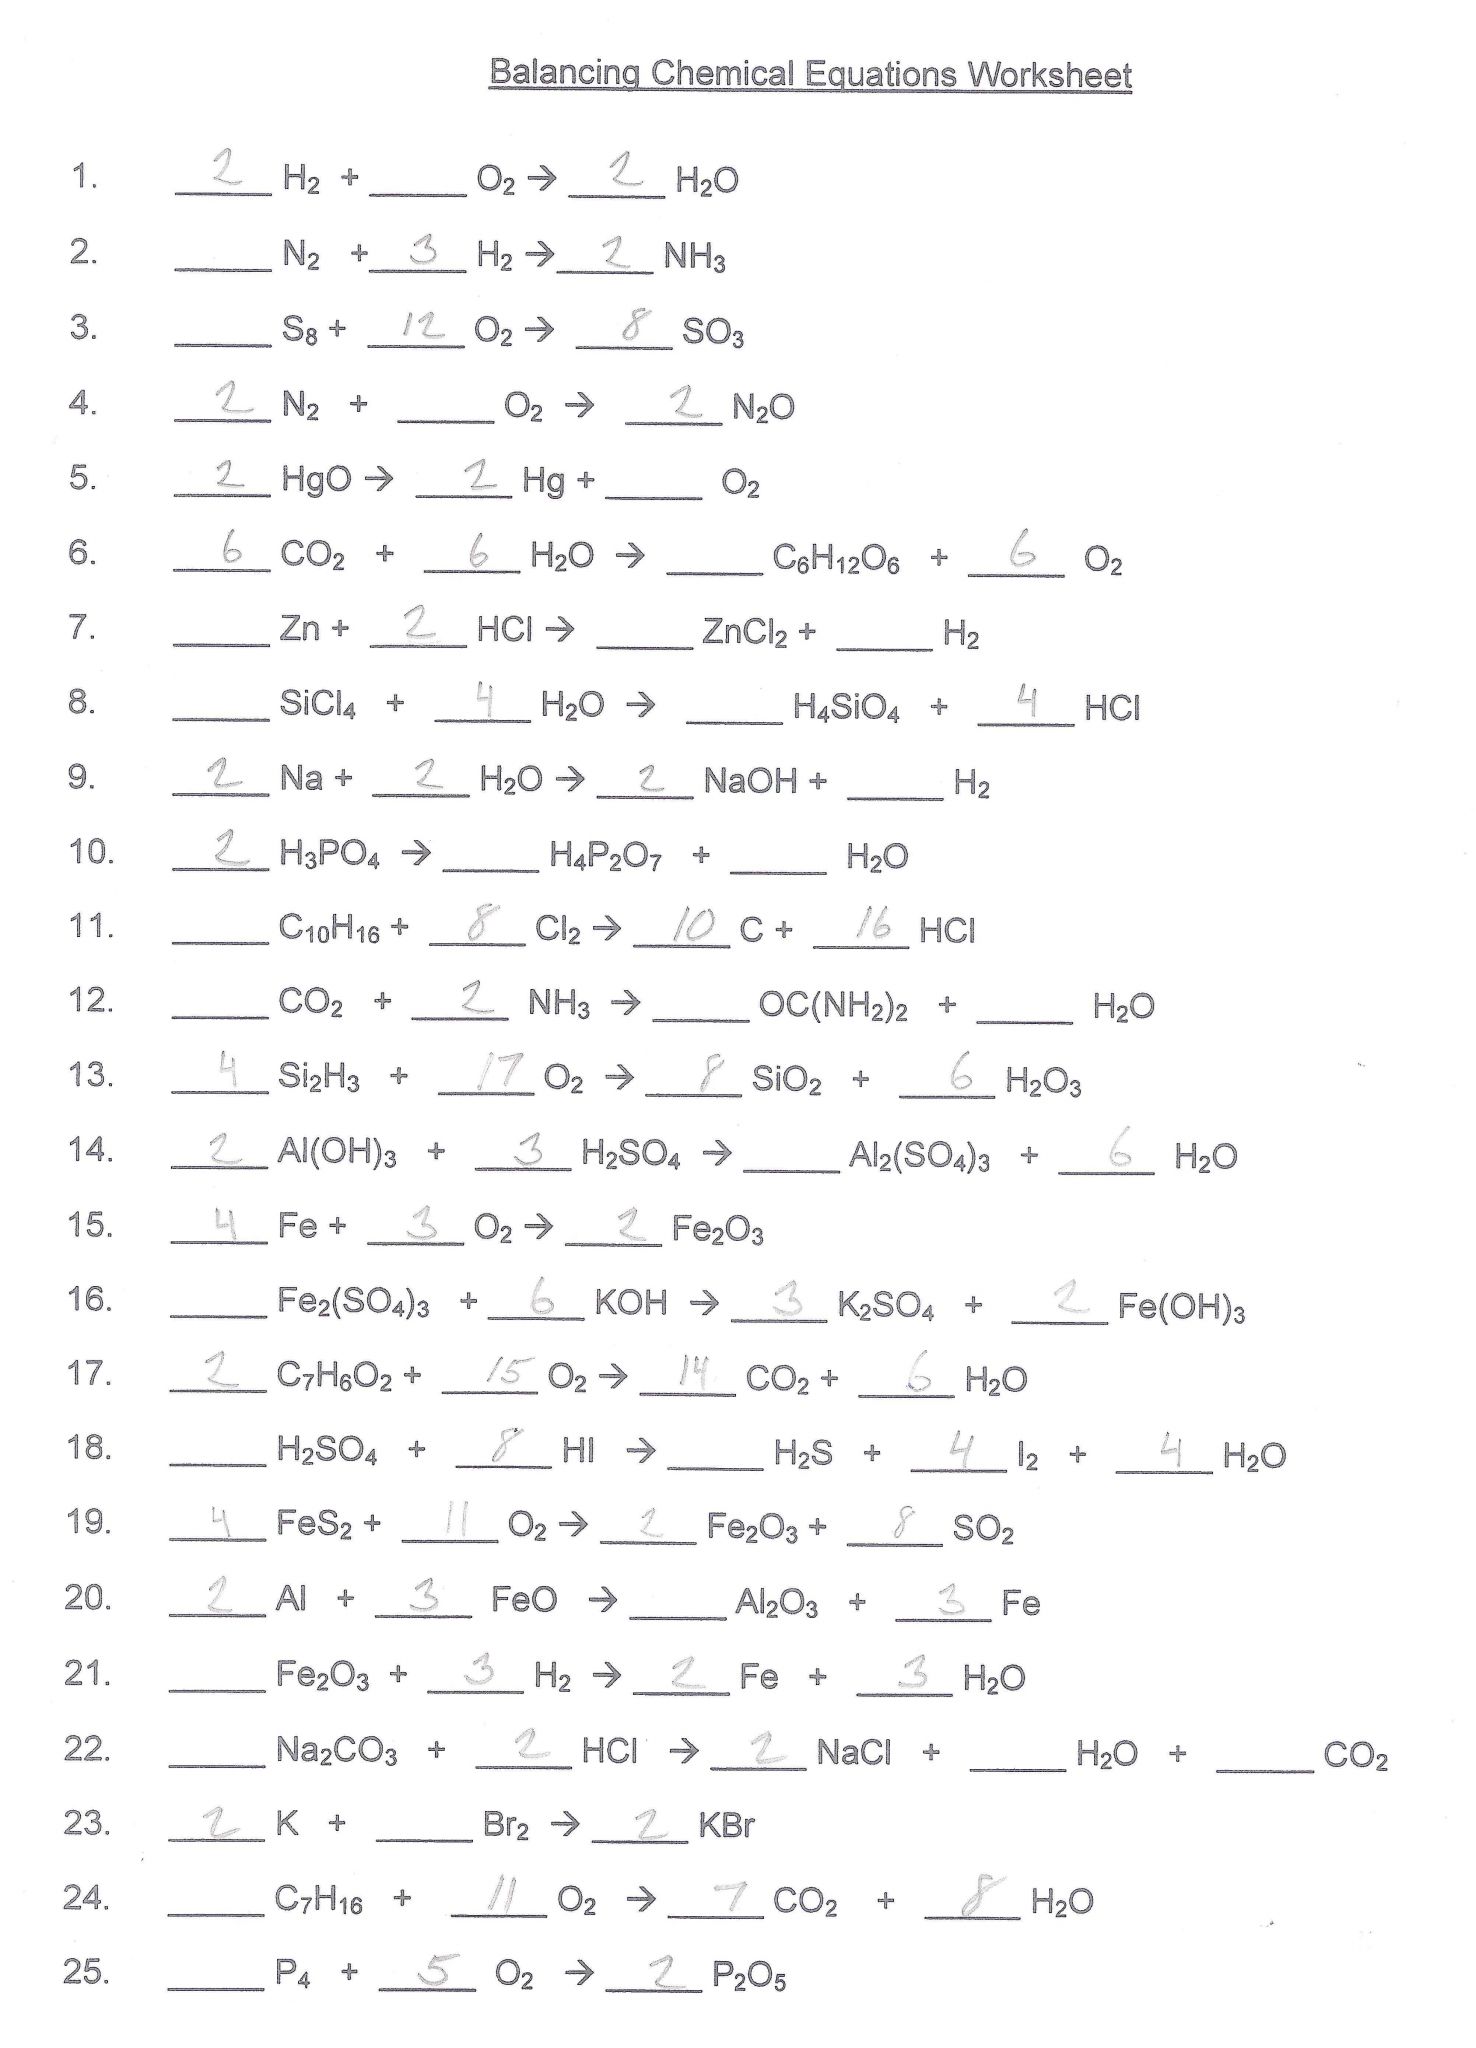 Limiting Reagent Worksheet Answer Key with Work together with 39 Elegant Limiting Reagent Worksheet Answer Key with Work